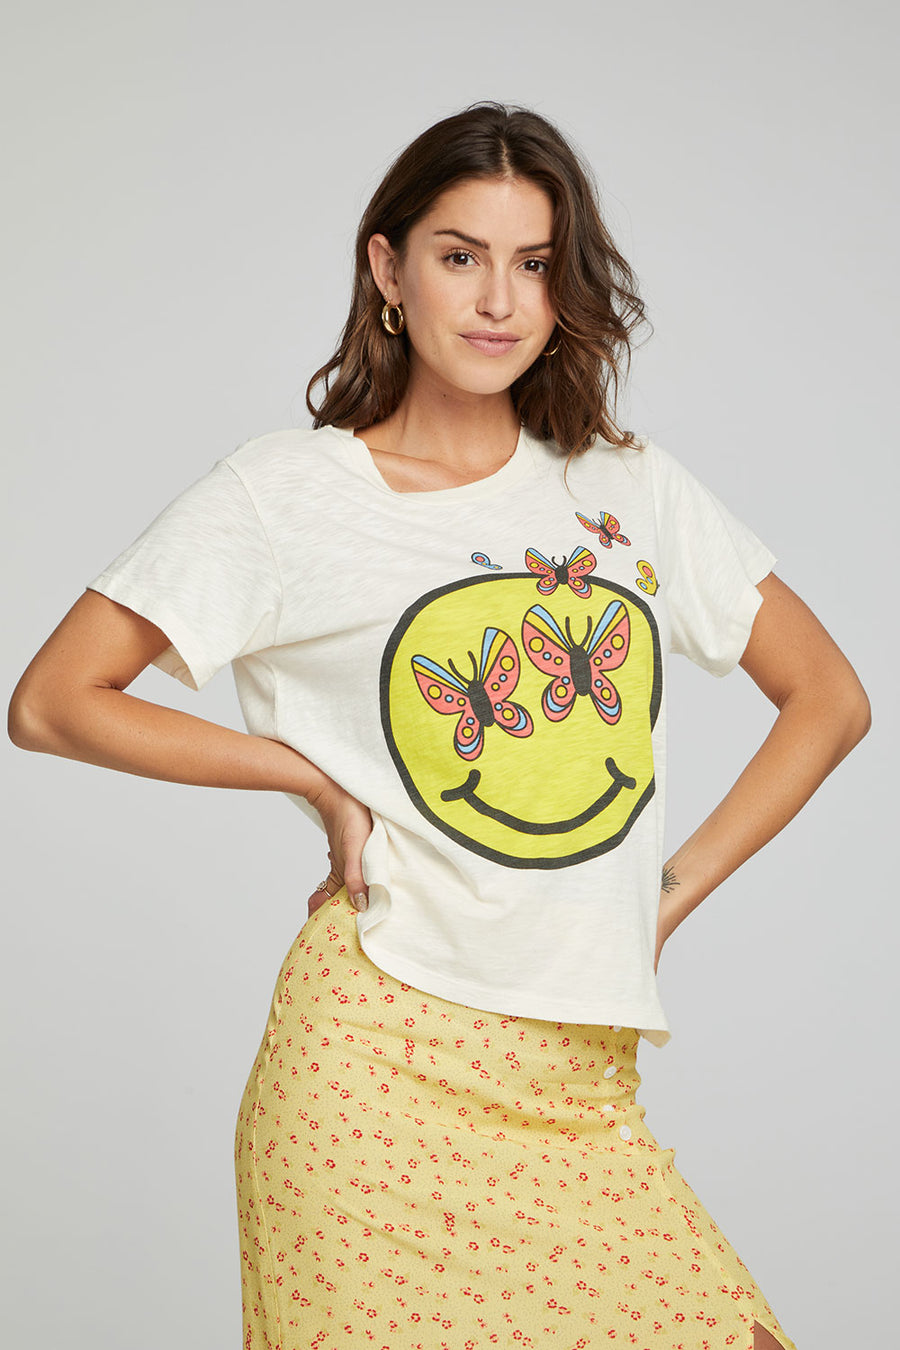 Smiley Butterflies WOMENS chaserbrand